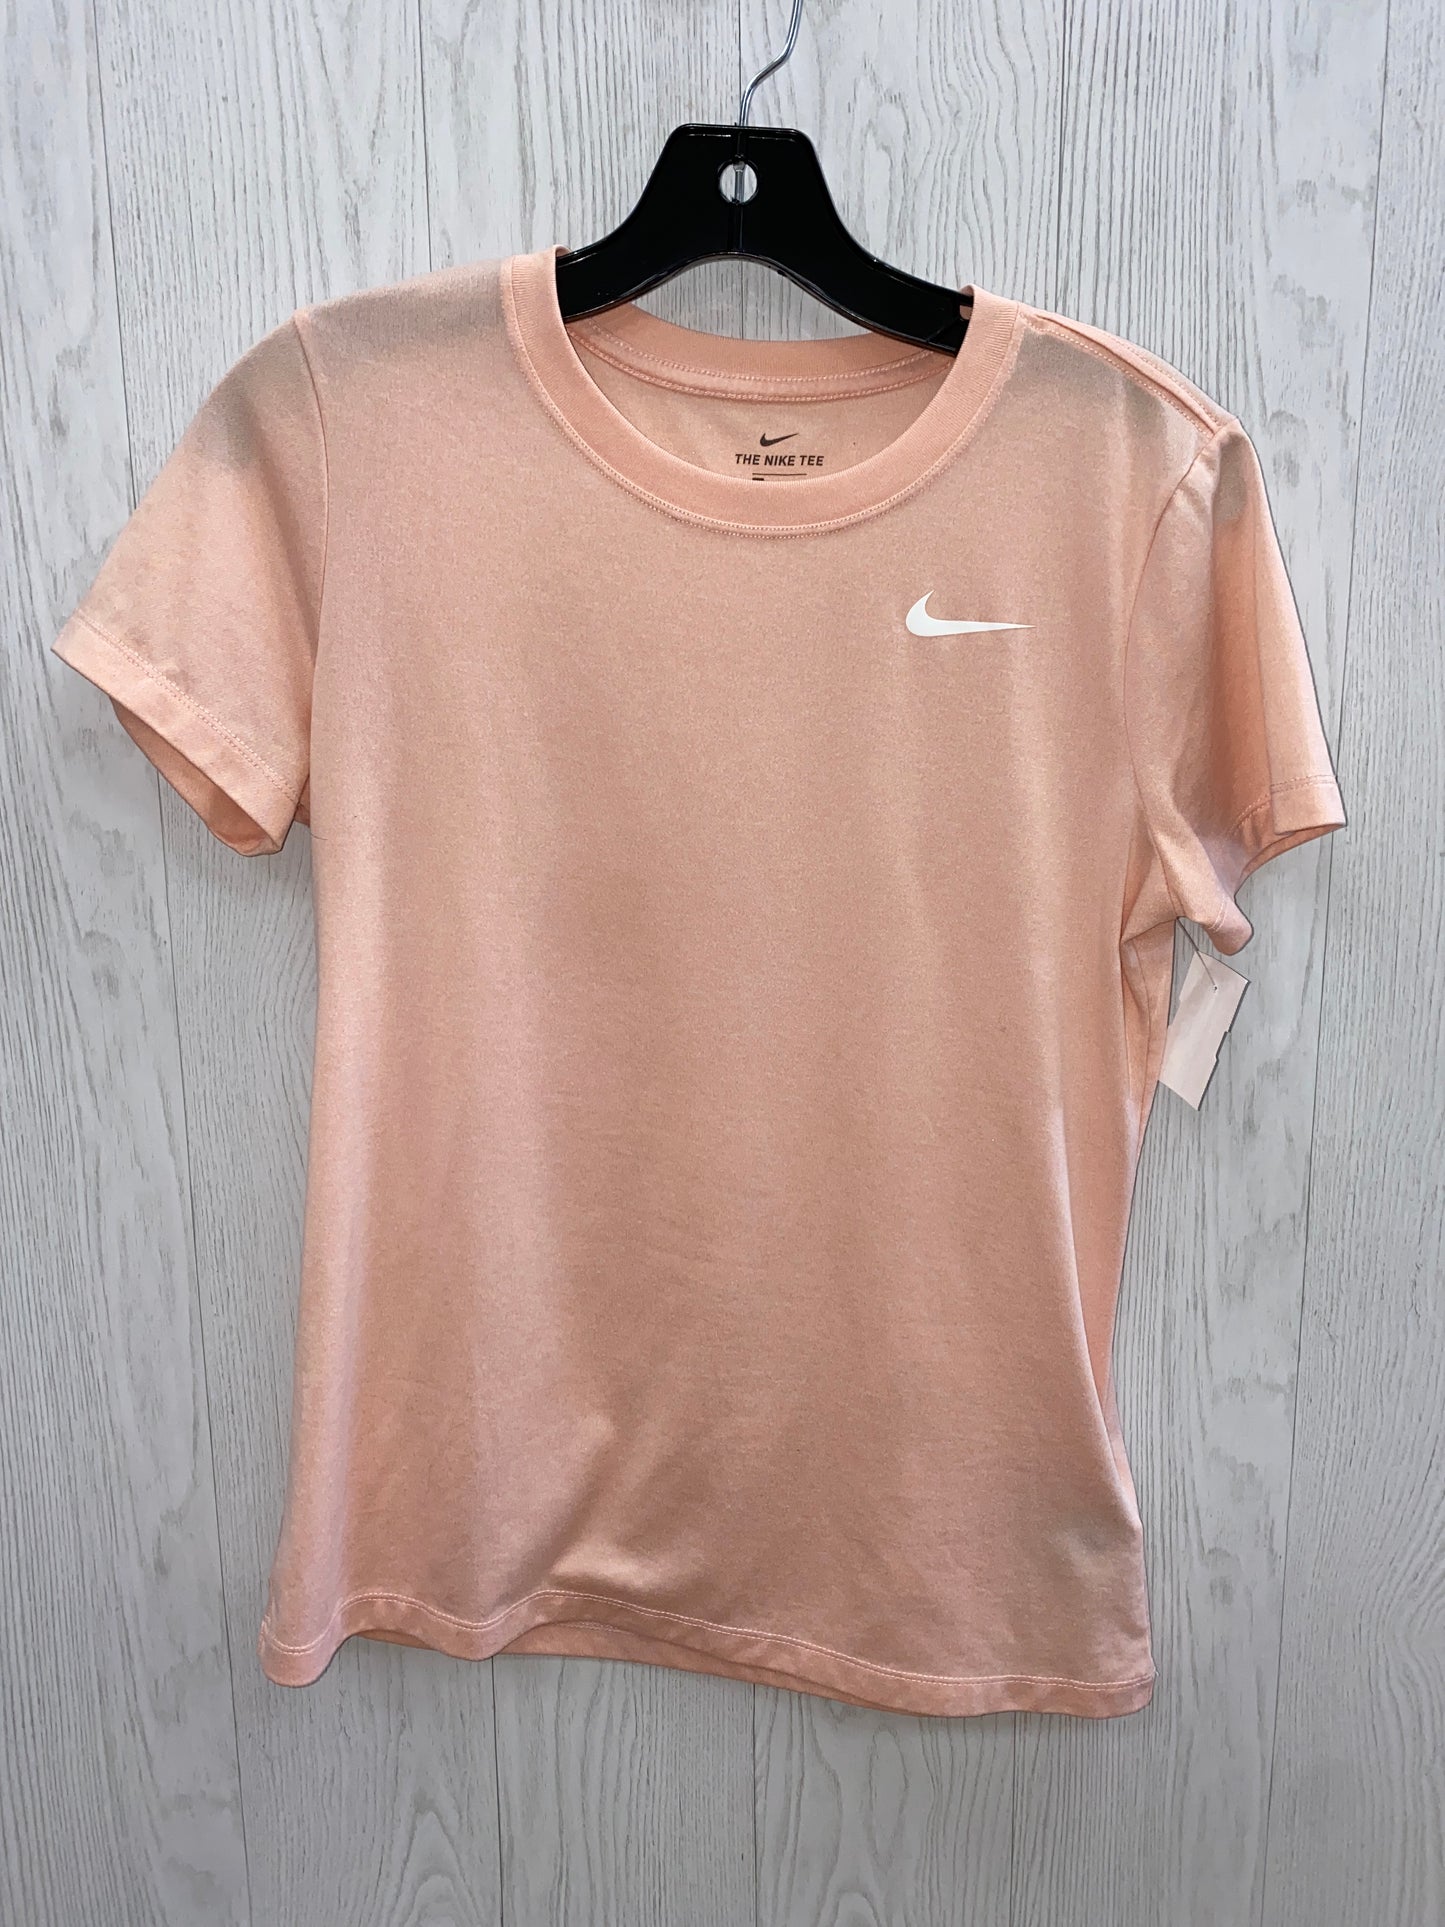 Athletic Top Short Sleeve By Nike  Size: S